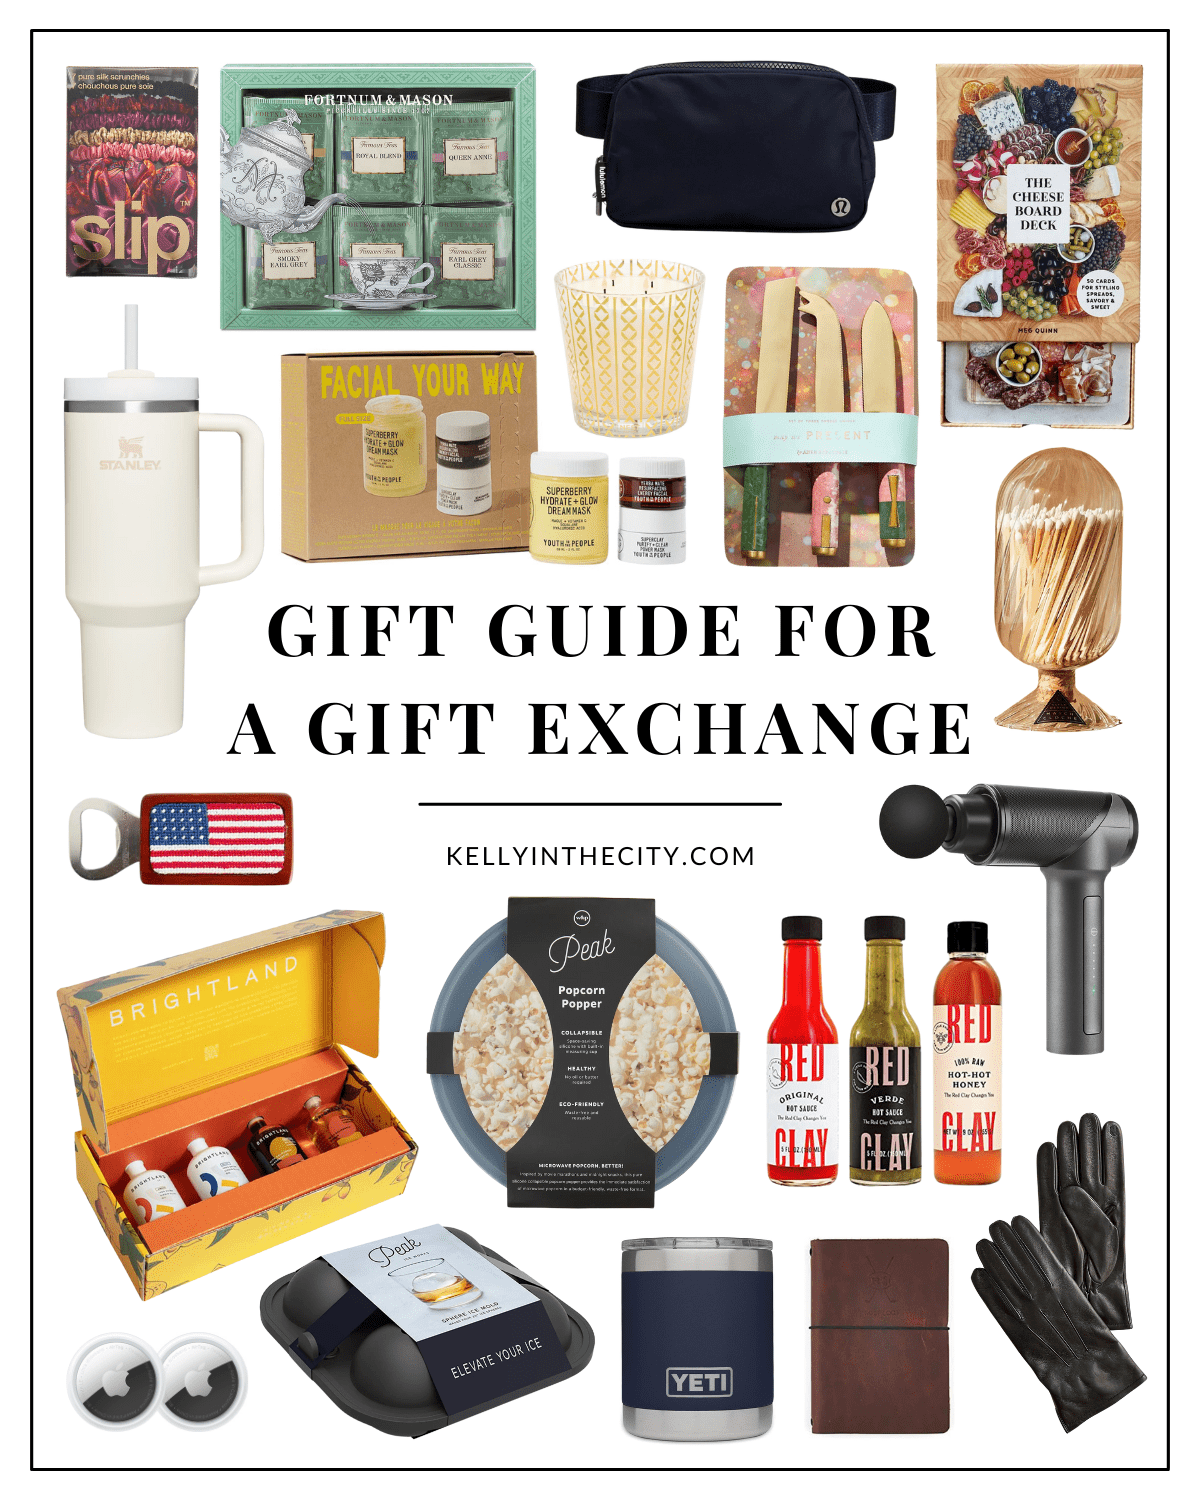 Gift Guide for a Gift Exchange